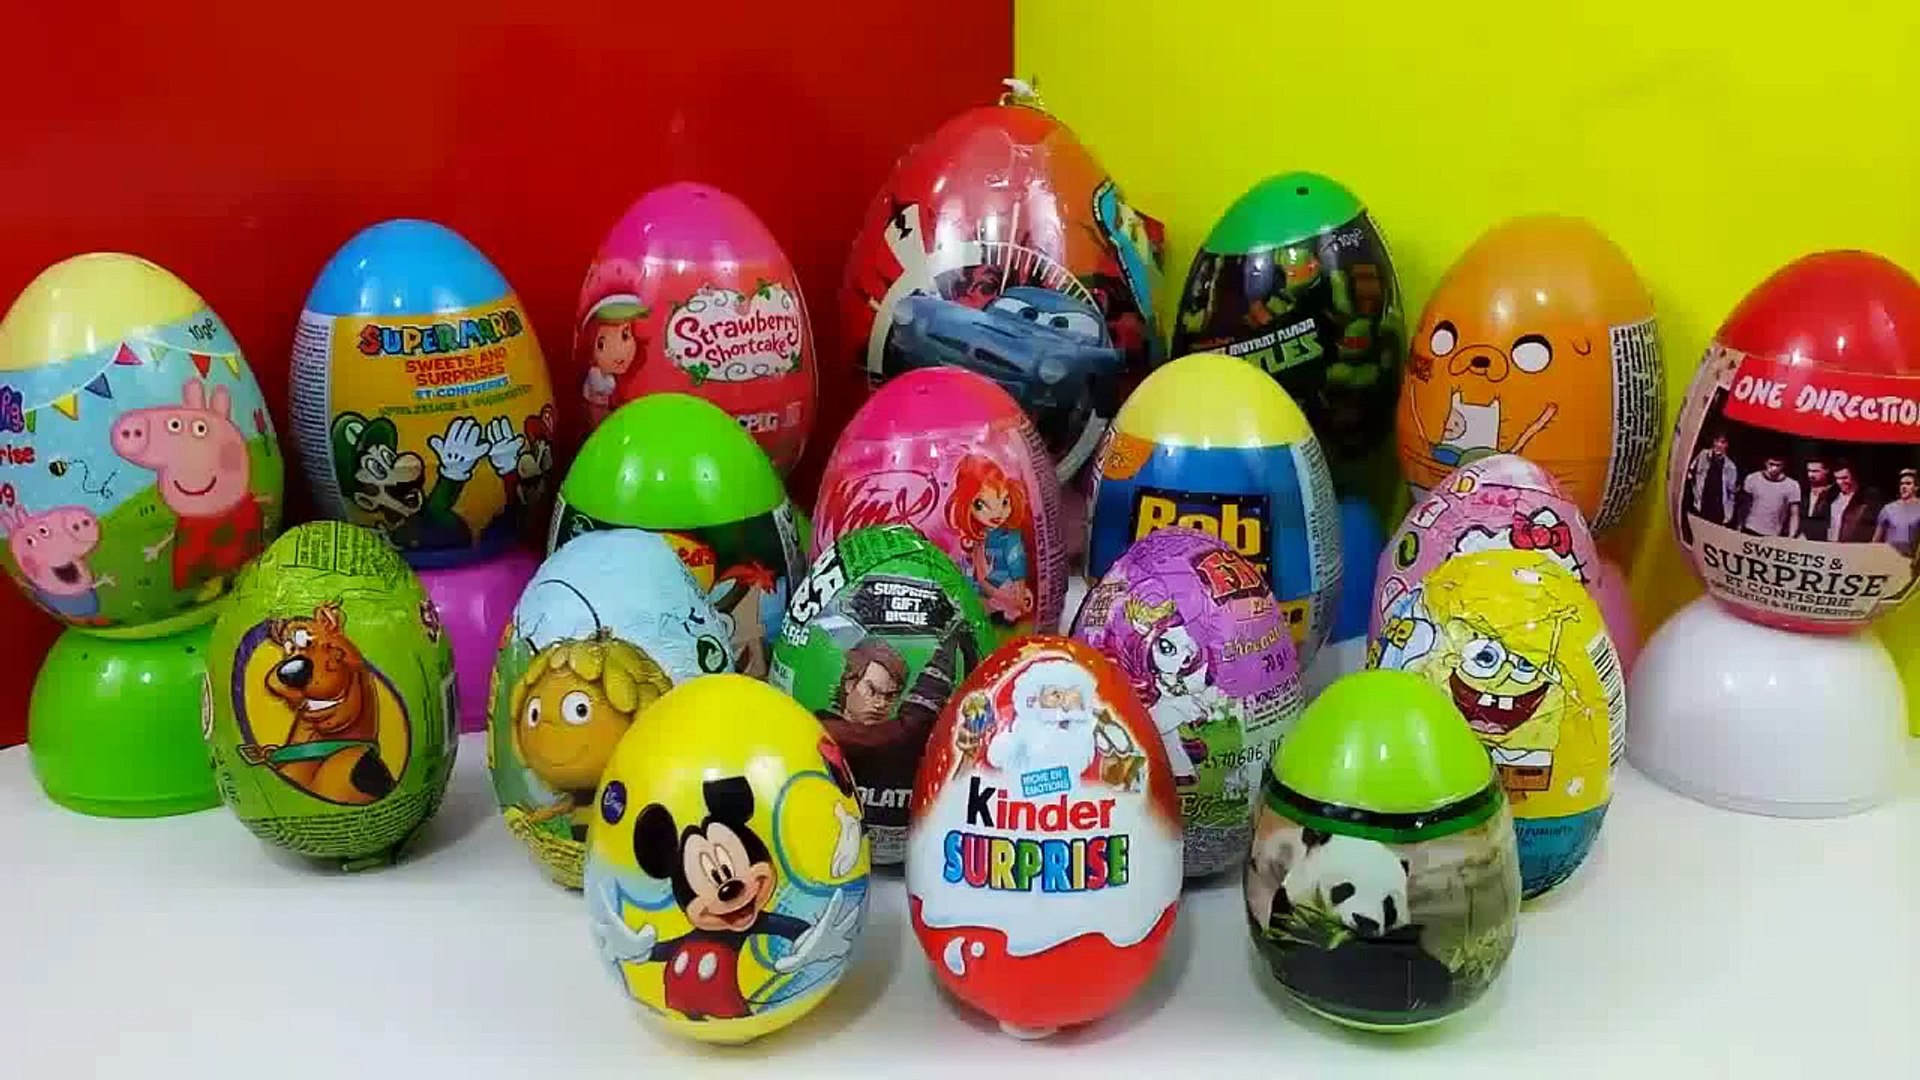 19 Surprise Eggs Cars Peppa Pig Winx Spongebob One Direction Kinder  Surprise Christmas Unboxing - Dailymotion Video